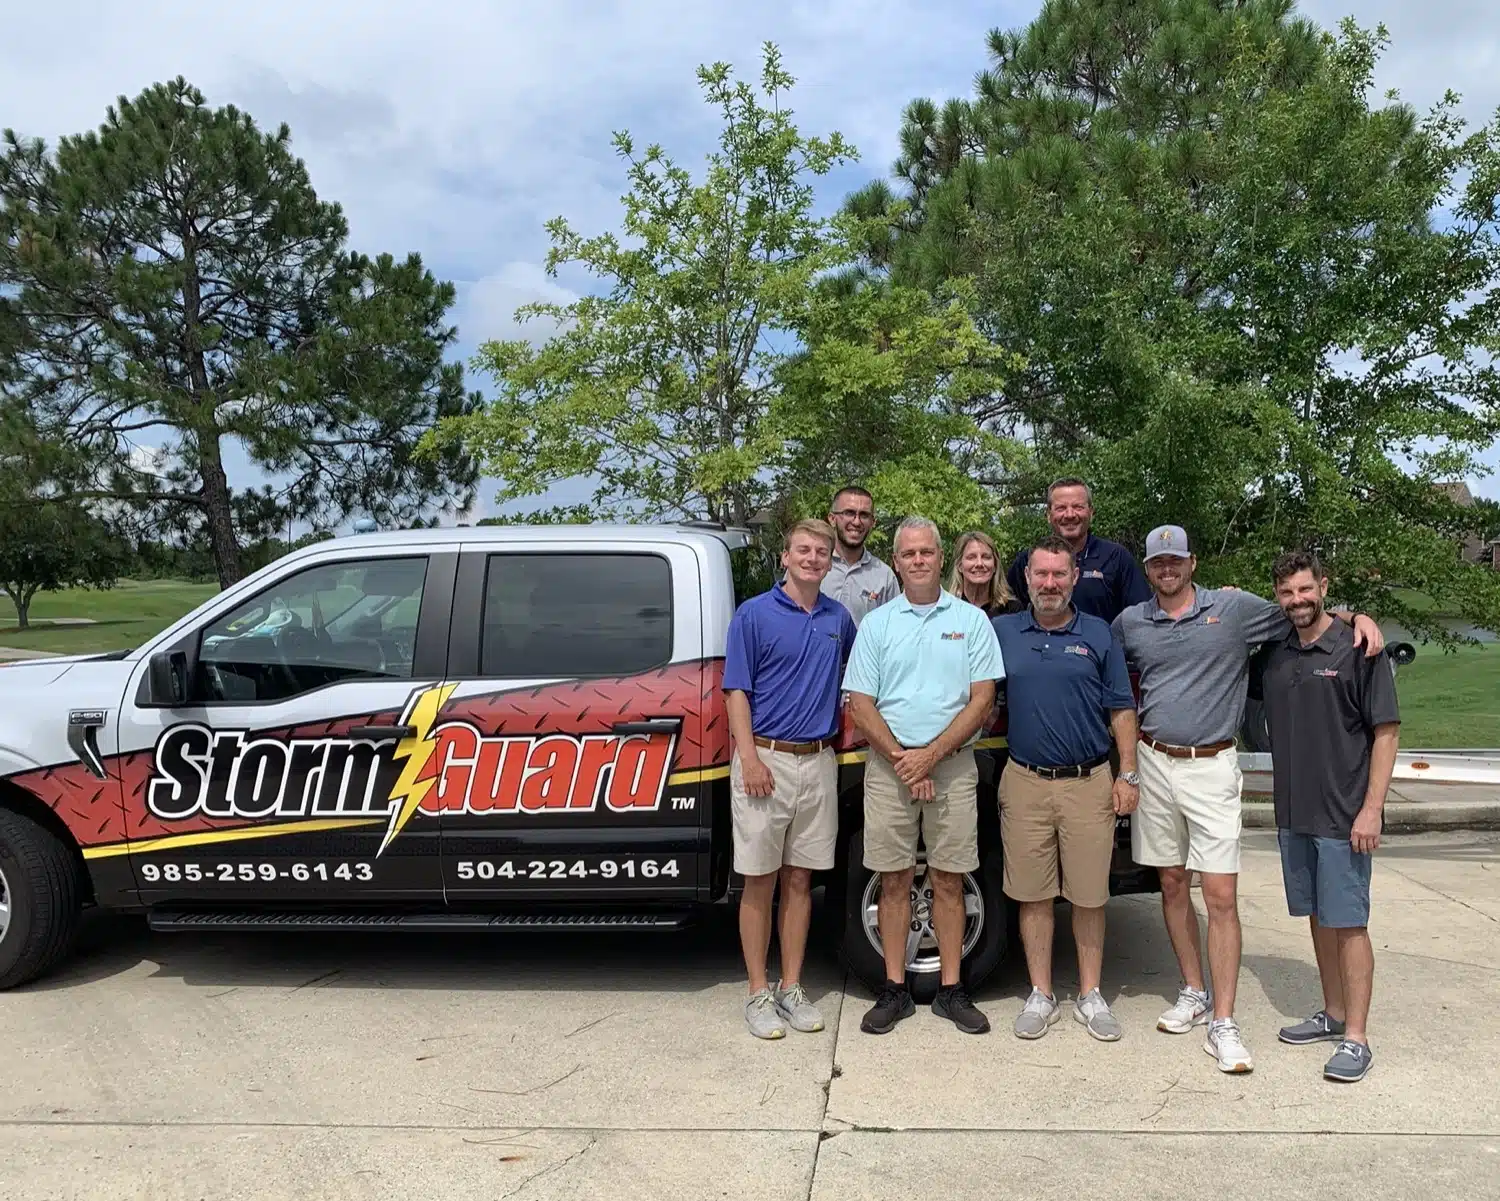 Storm Guard team in front of a roofing truck